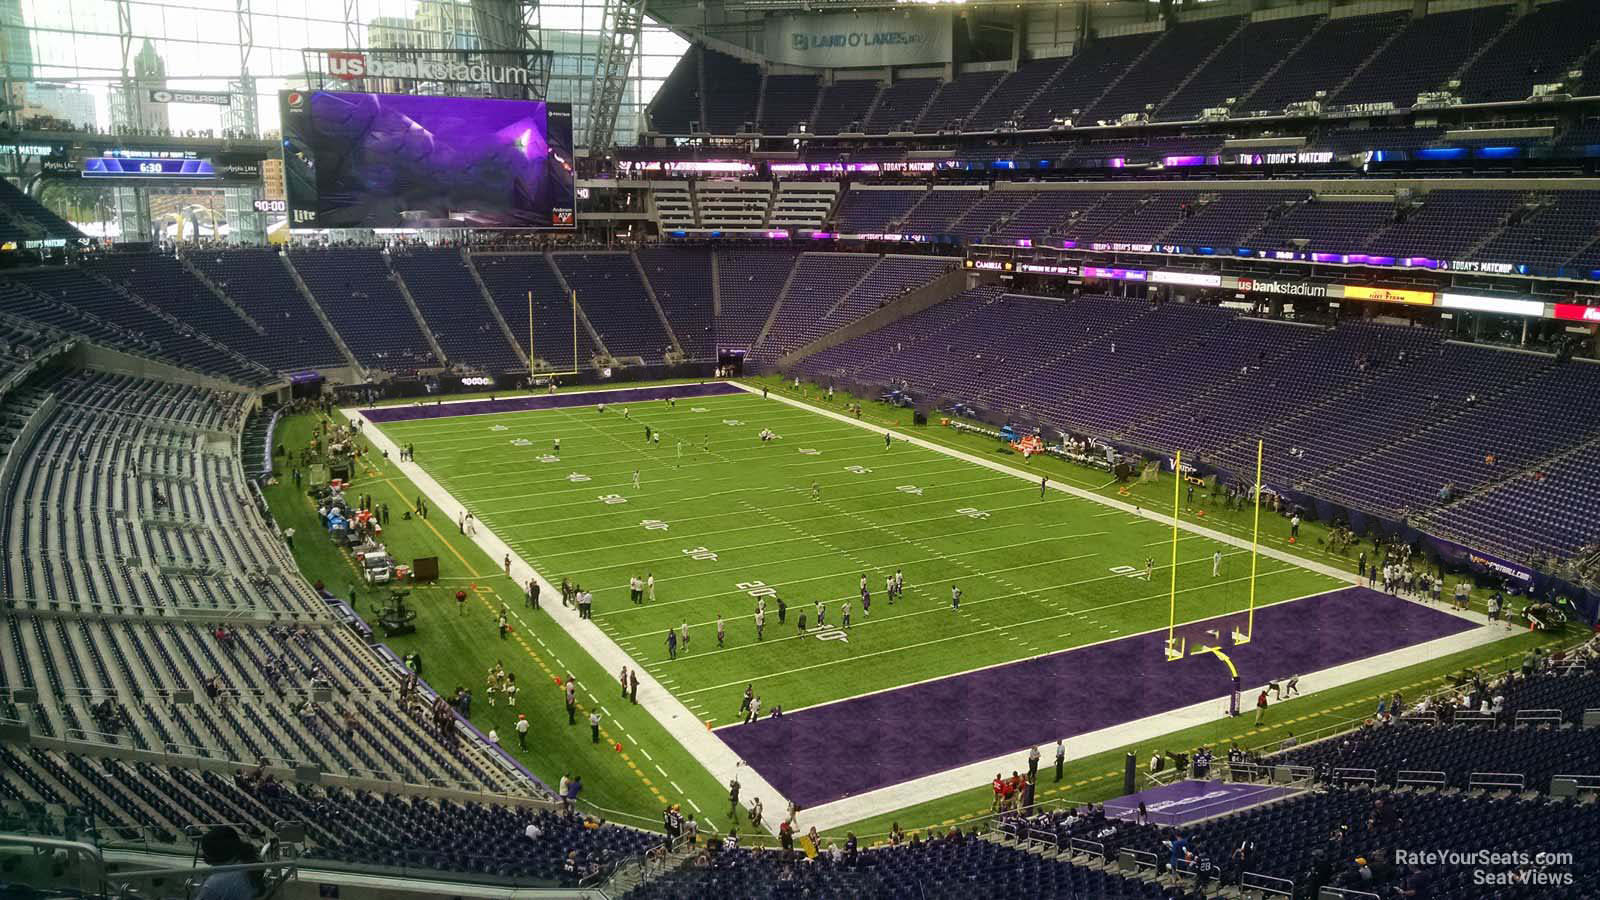 section 225, row 11 seat view  for football - u.s. bank stadium